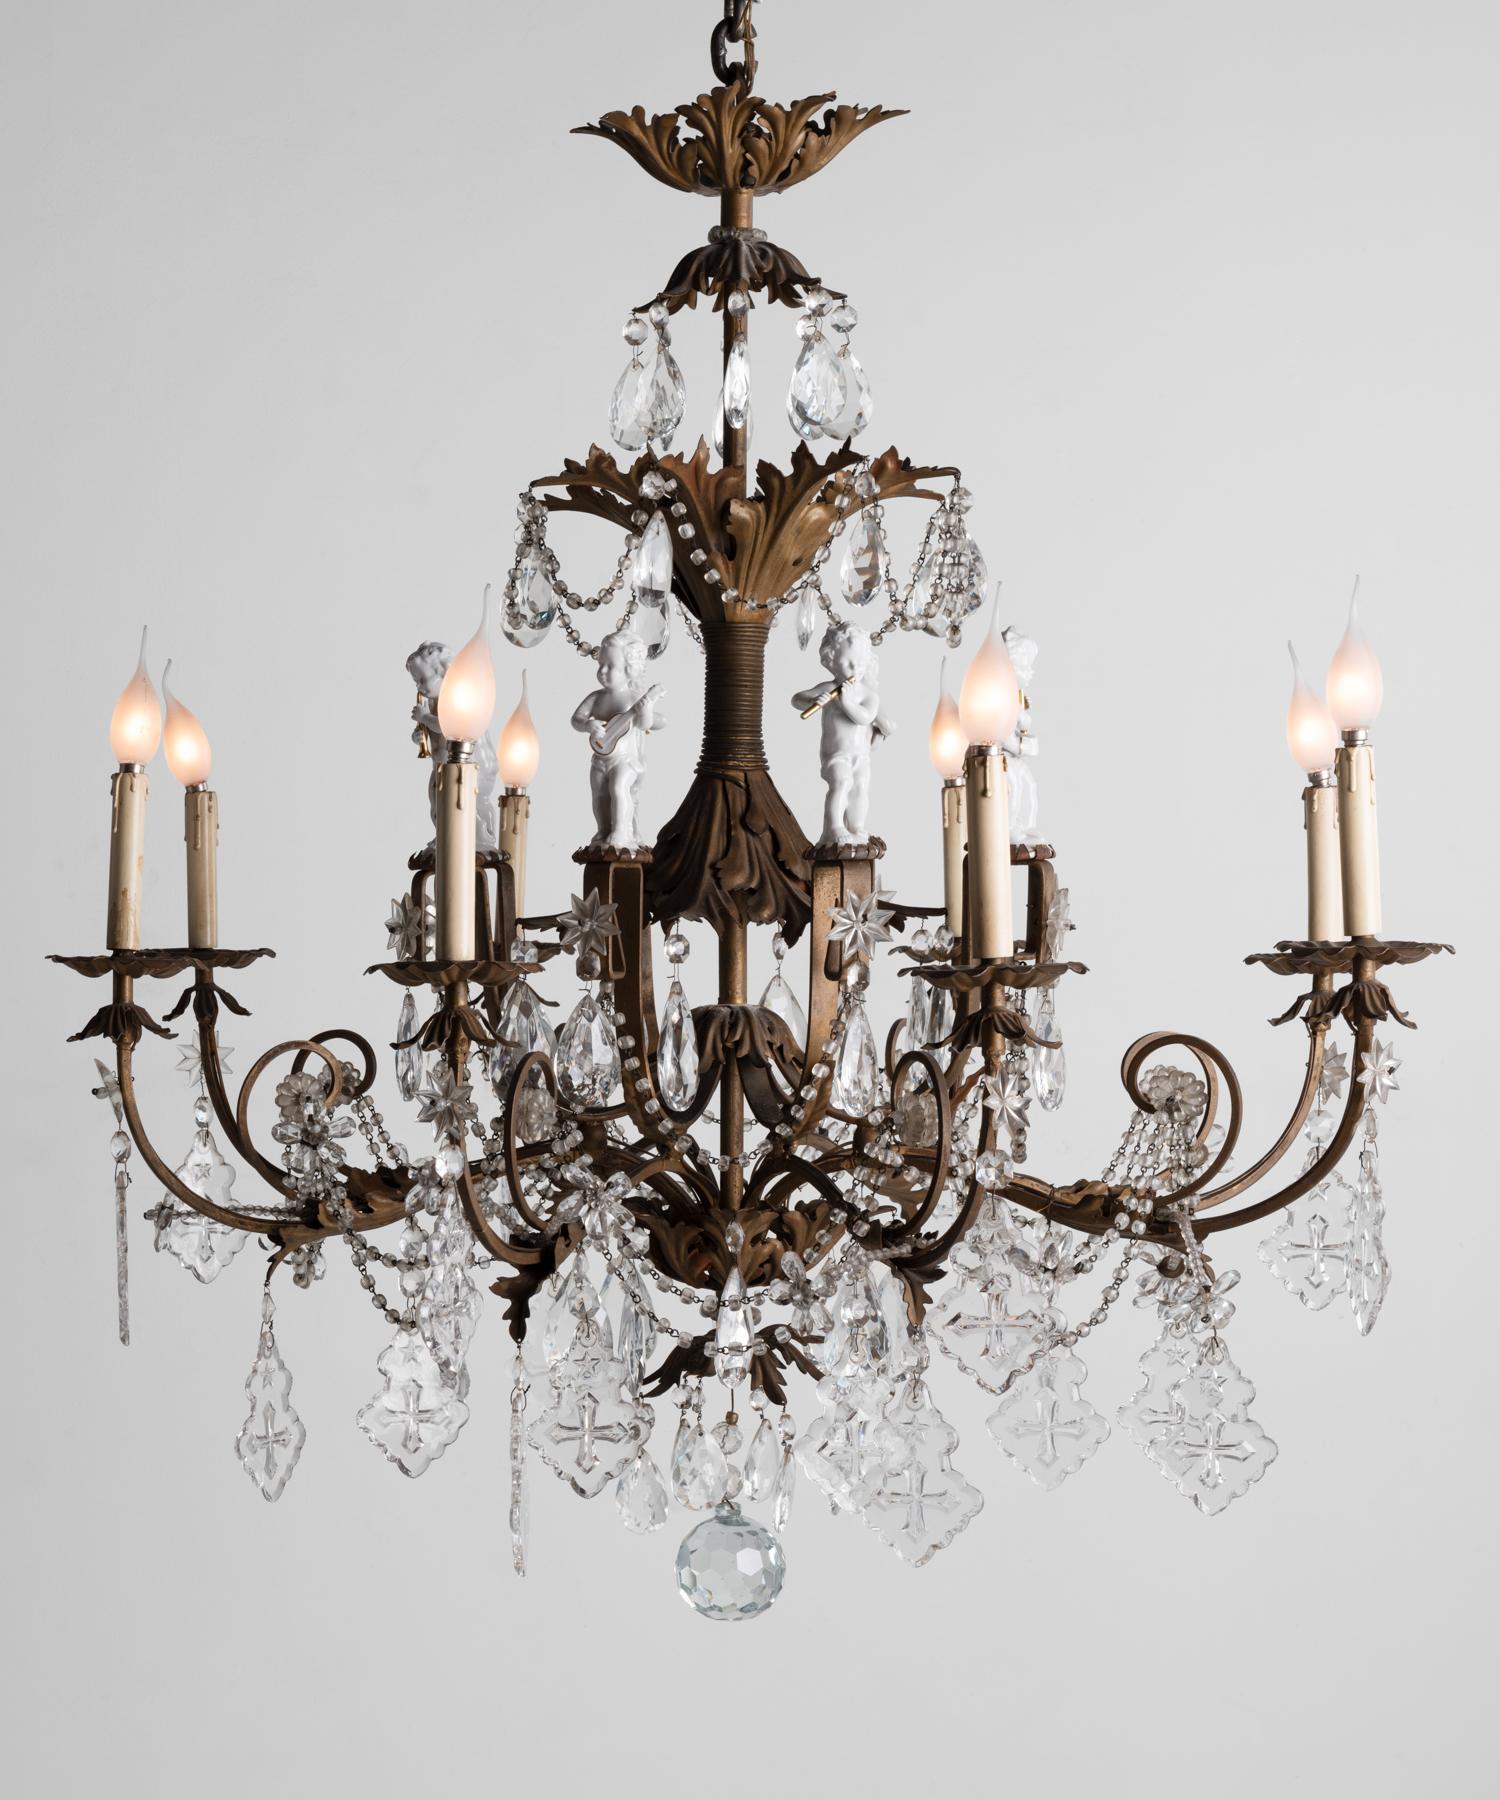 Ornate Brass Chandelier with Porcelain Figures, Italy, circa 1920

An exquisite, unique form with faux candle lights, crystal decorative elements, a highly detailed, patinated brass structure, and (8) partially gilded porcelain musician figurines.